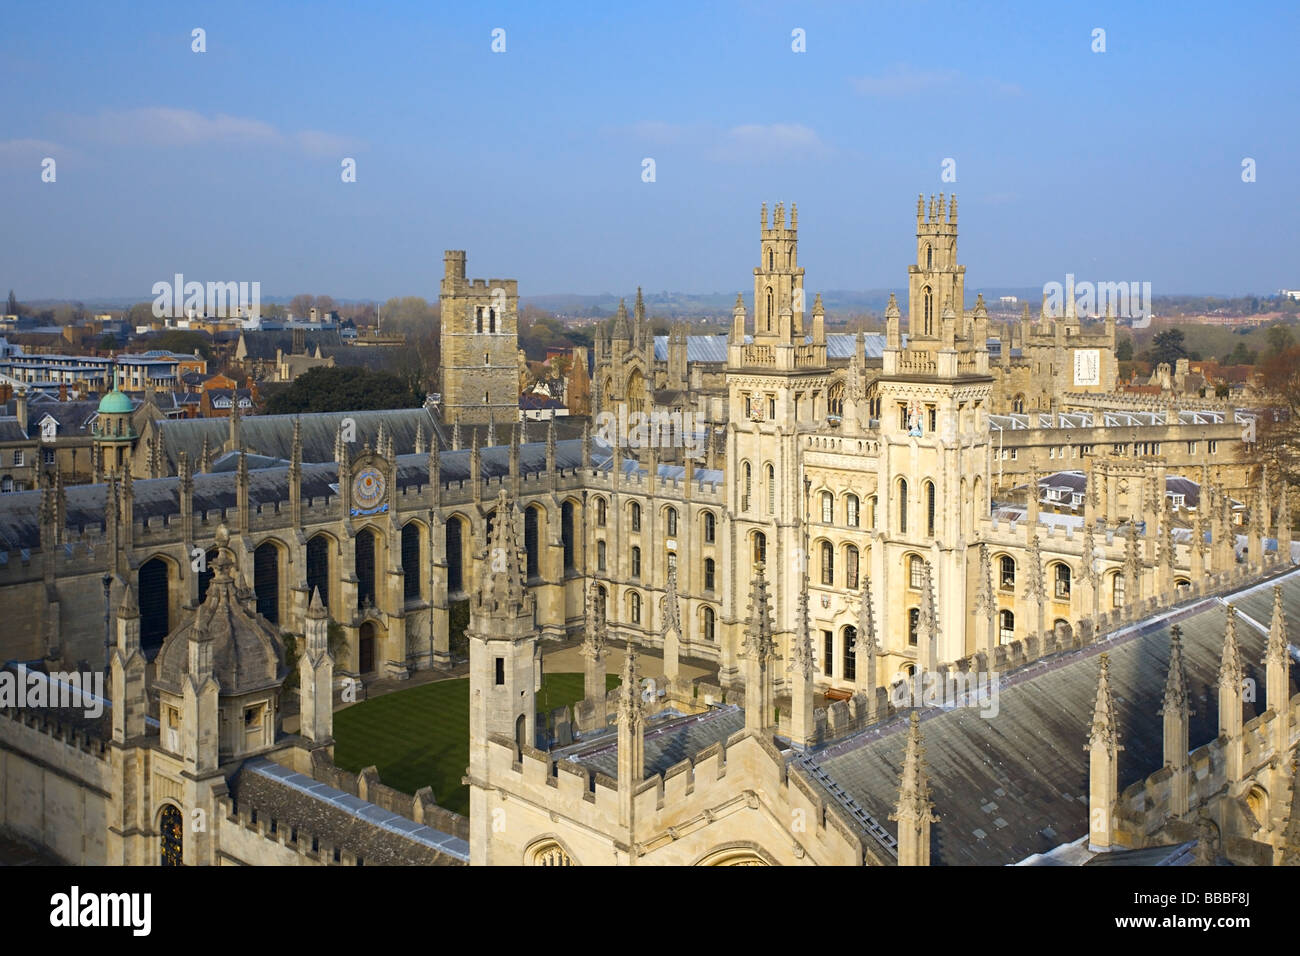 The Warden and College of the Souls of all Faithful People deceased in the University of Oxford, England Stock Photo